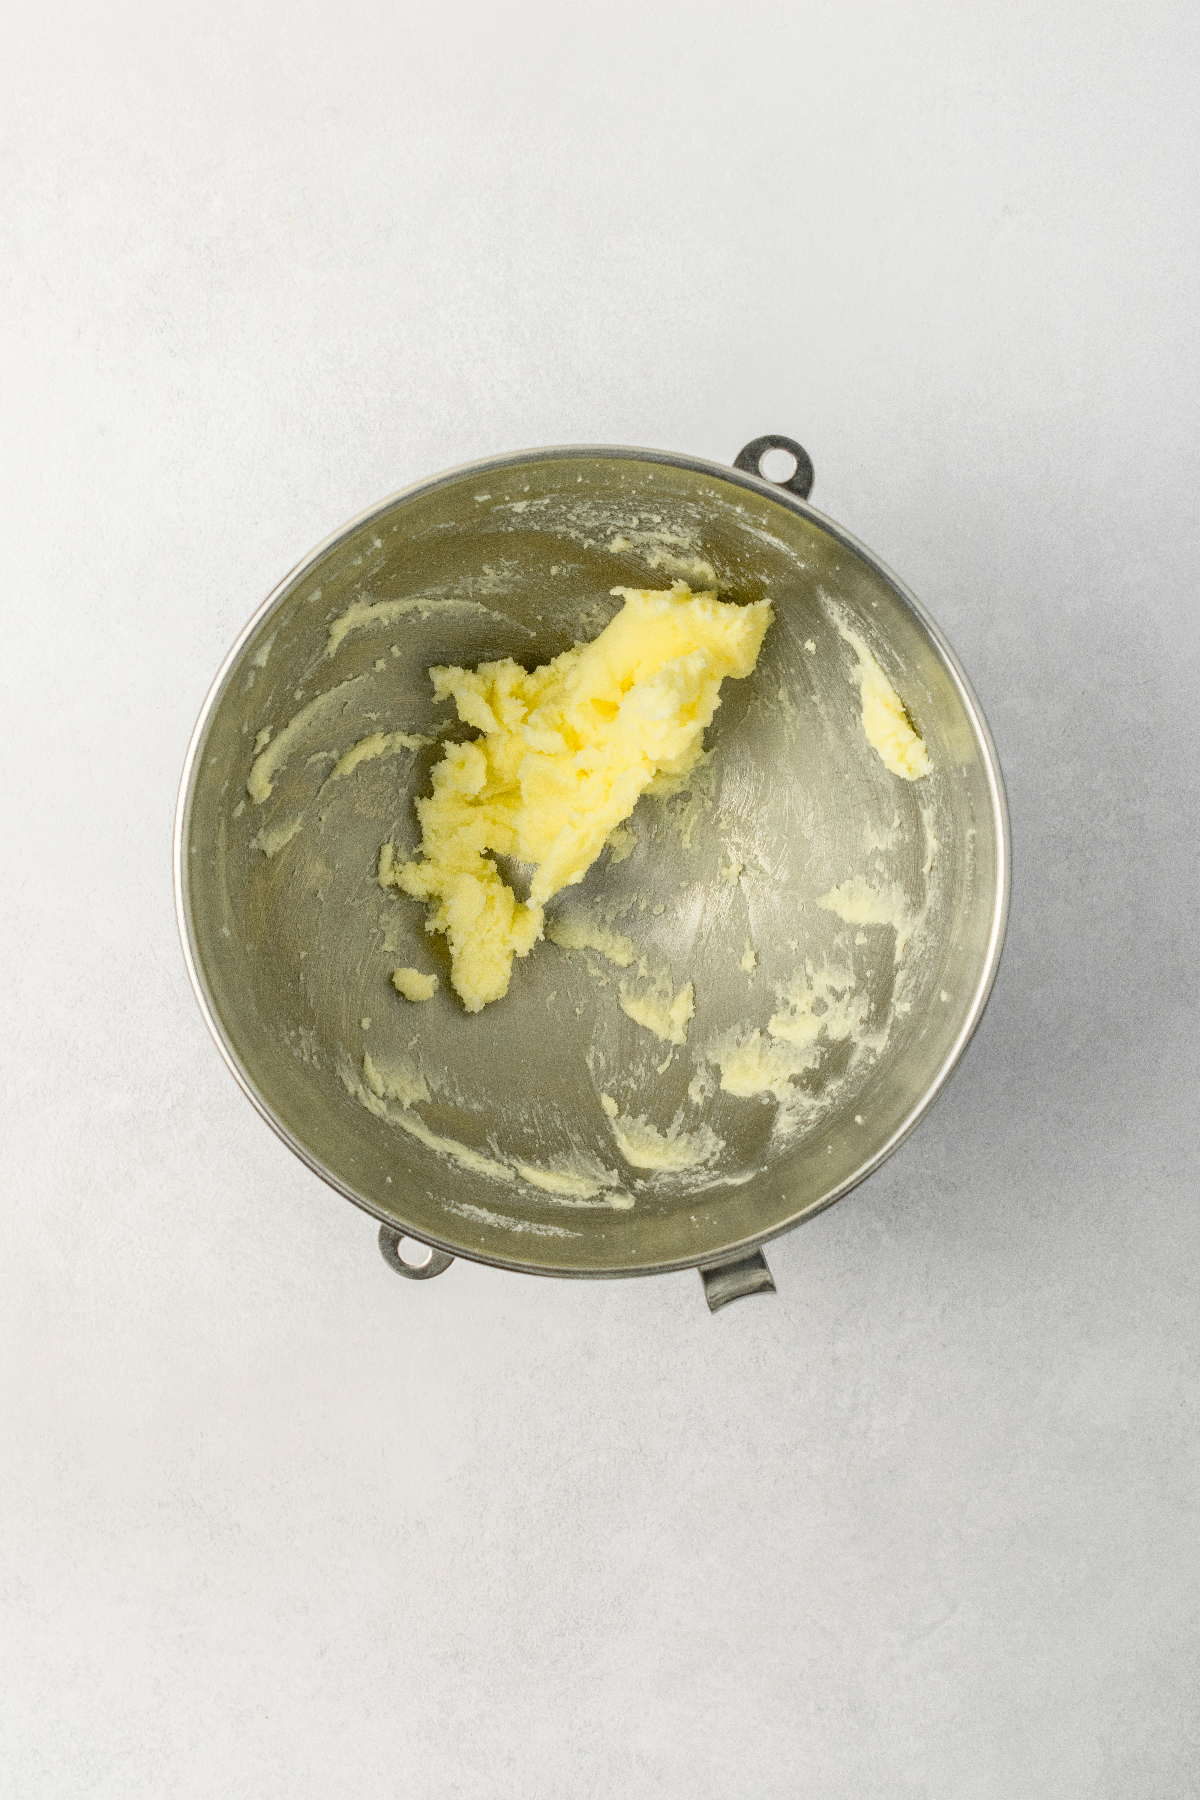 Creamed butter and sugar in a stainless steel bowl.